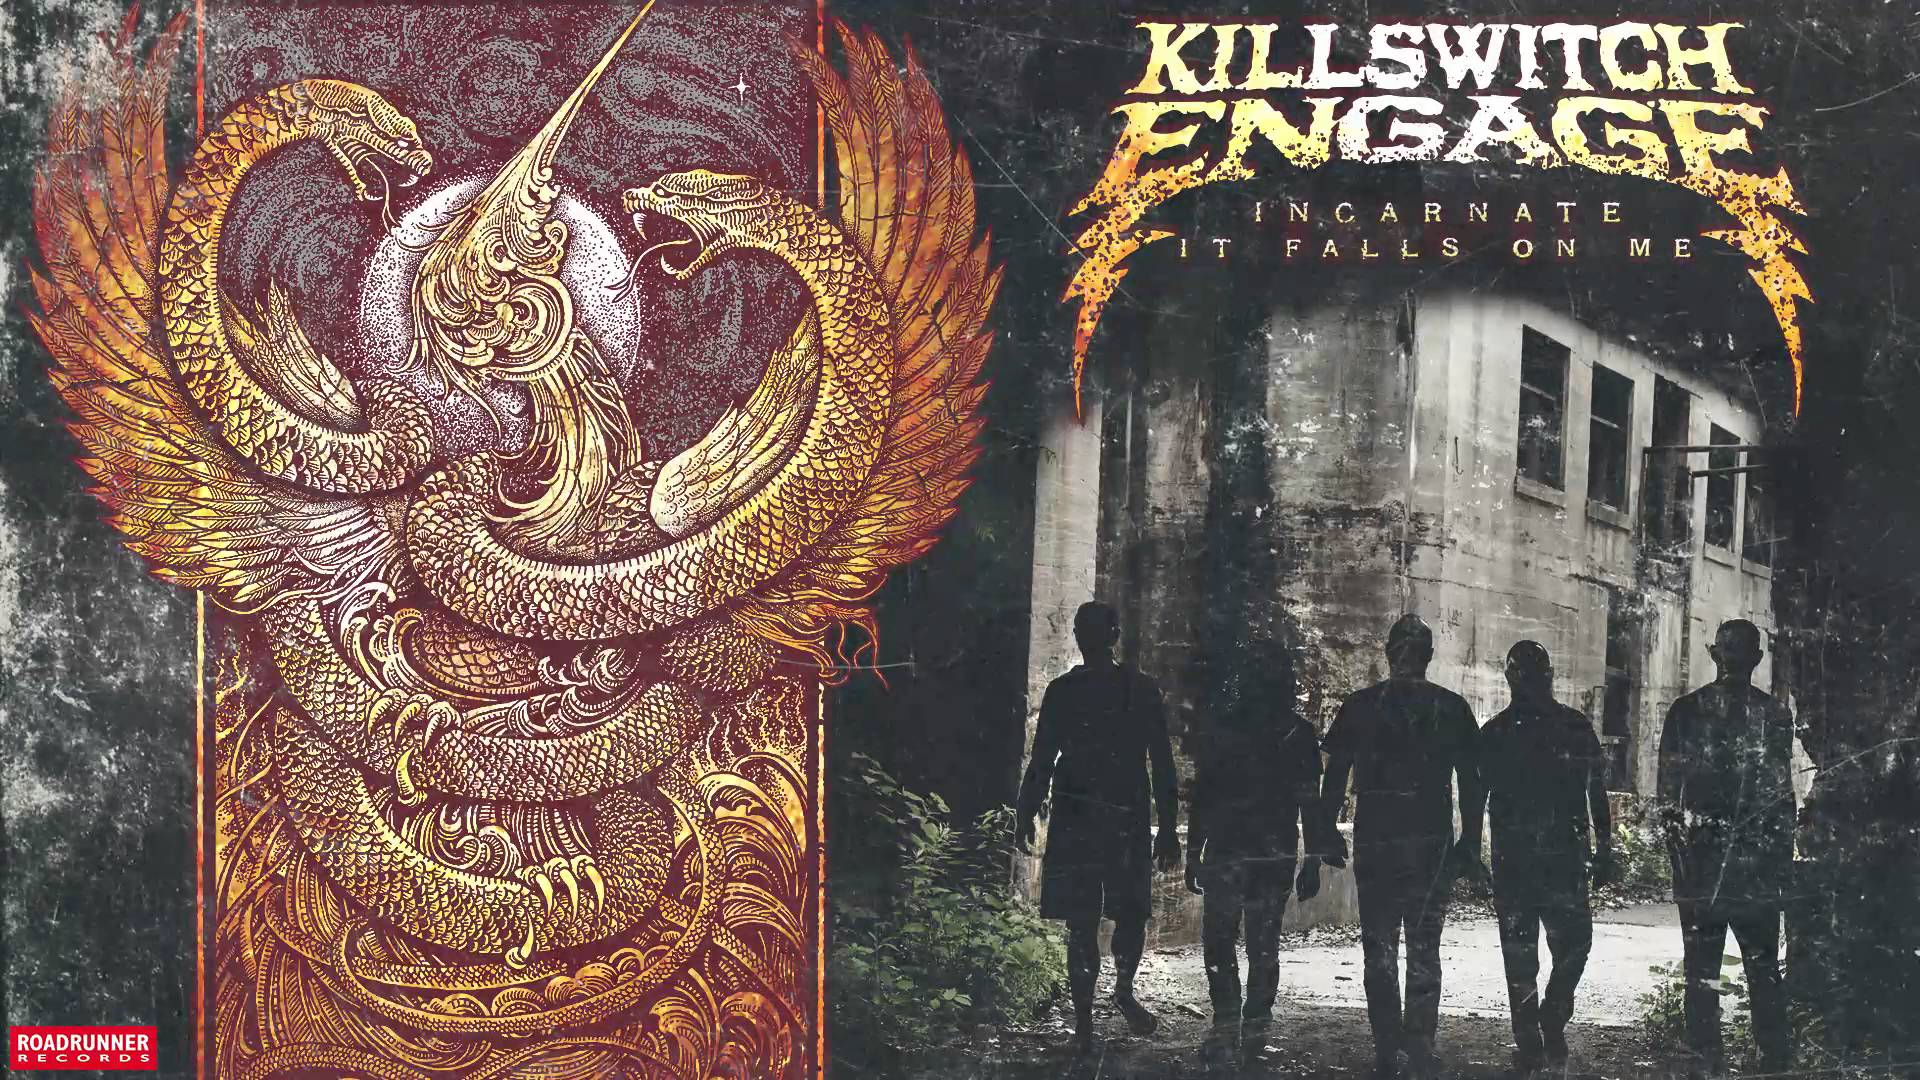 Killswitch Engage - It Falls On Me